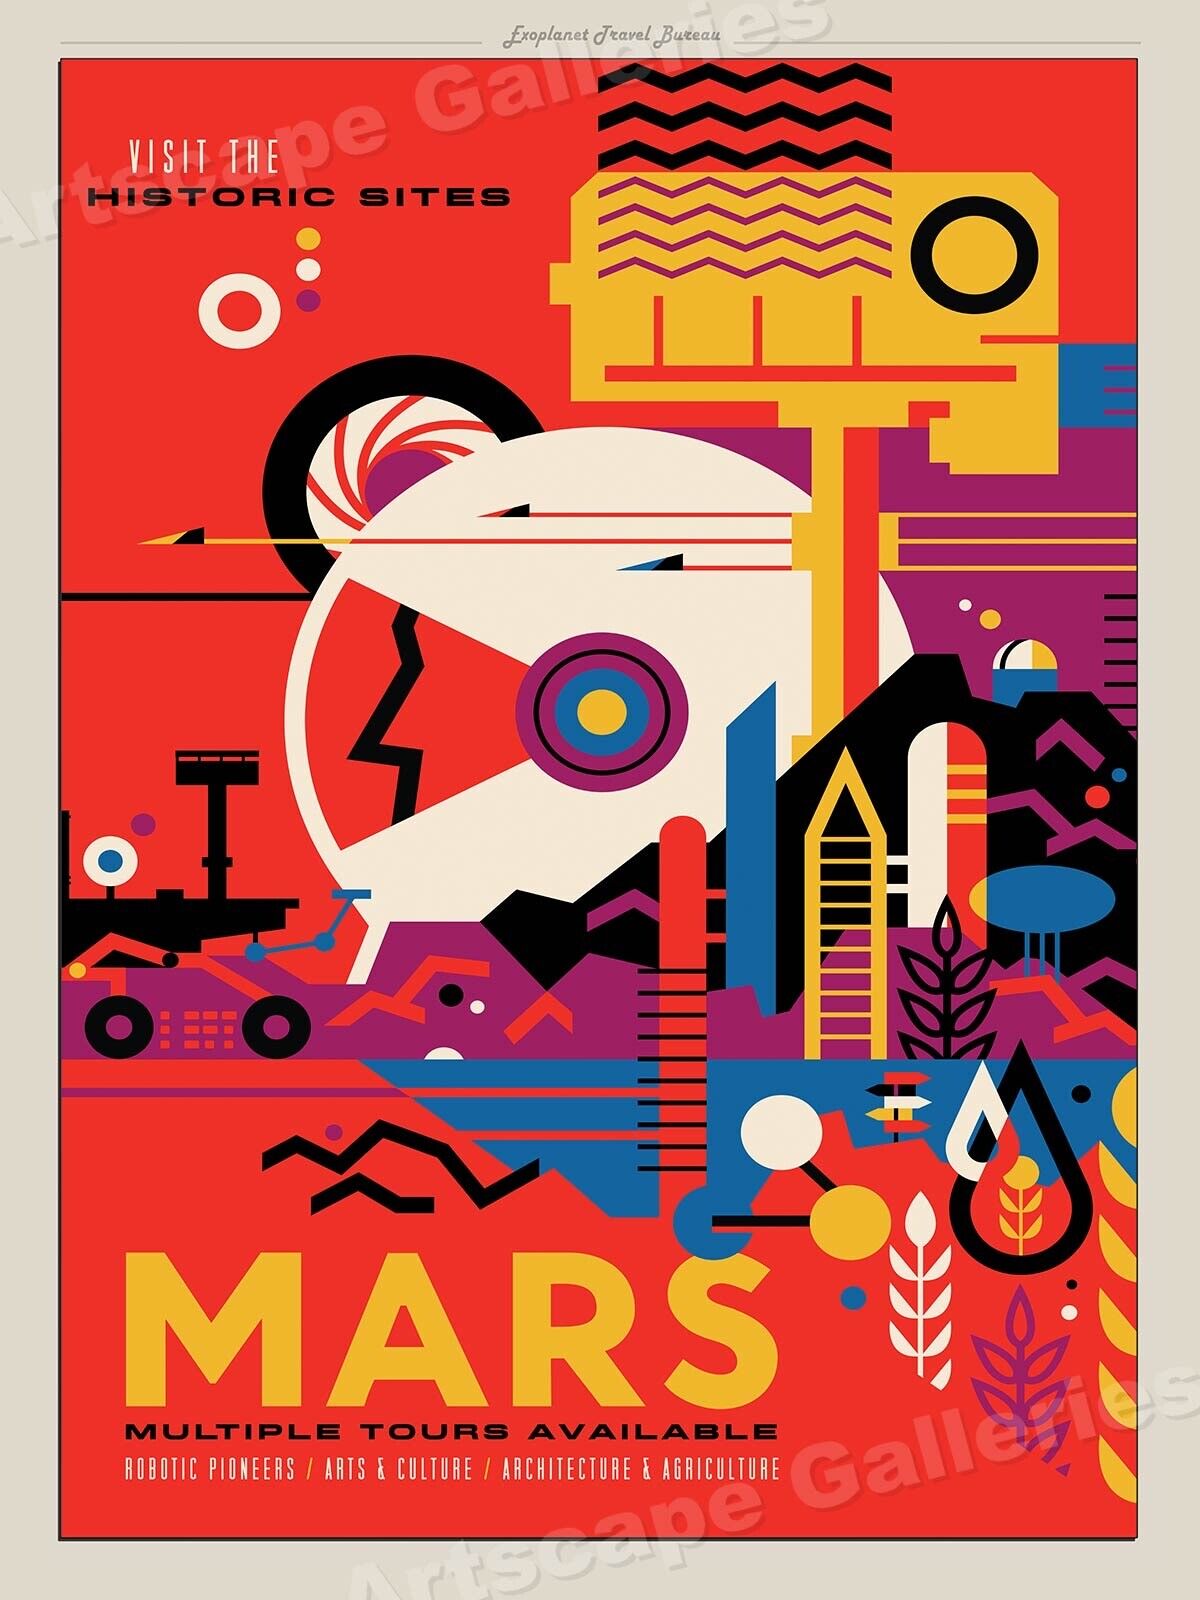 Retro Style Space Exploration Poster - Visit Historic Sites on Mars - 18x24